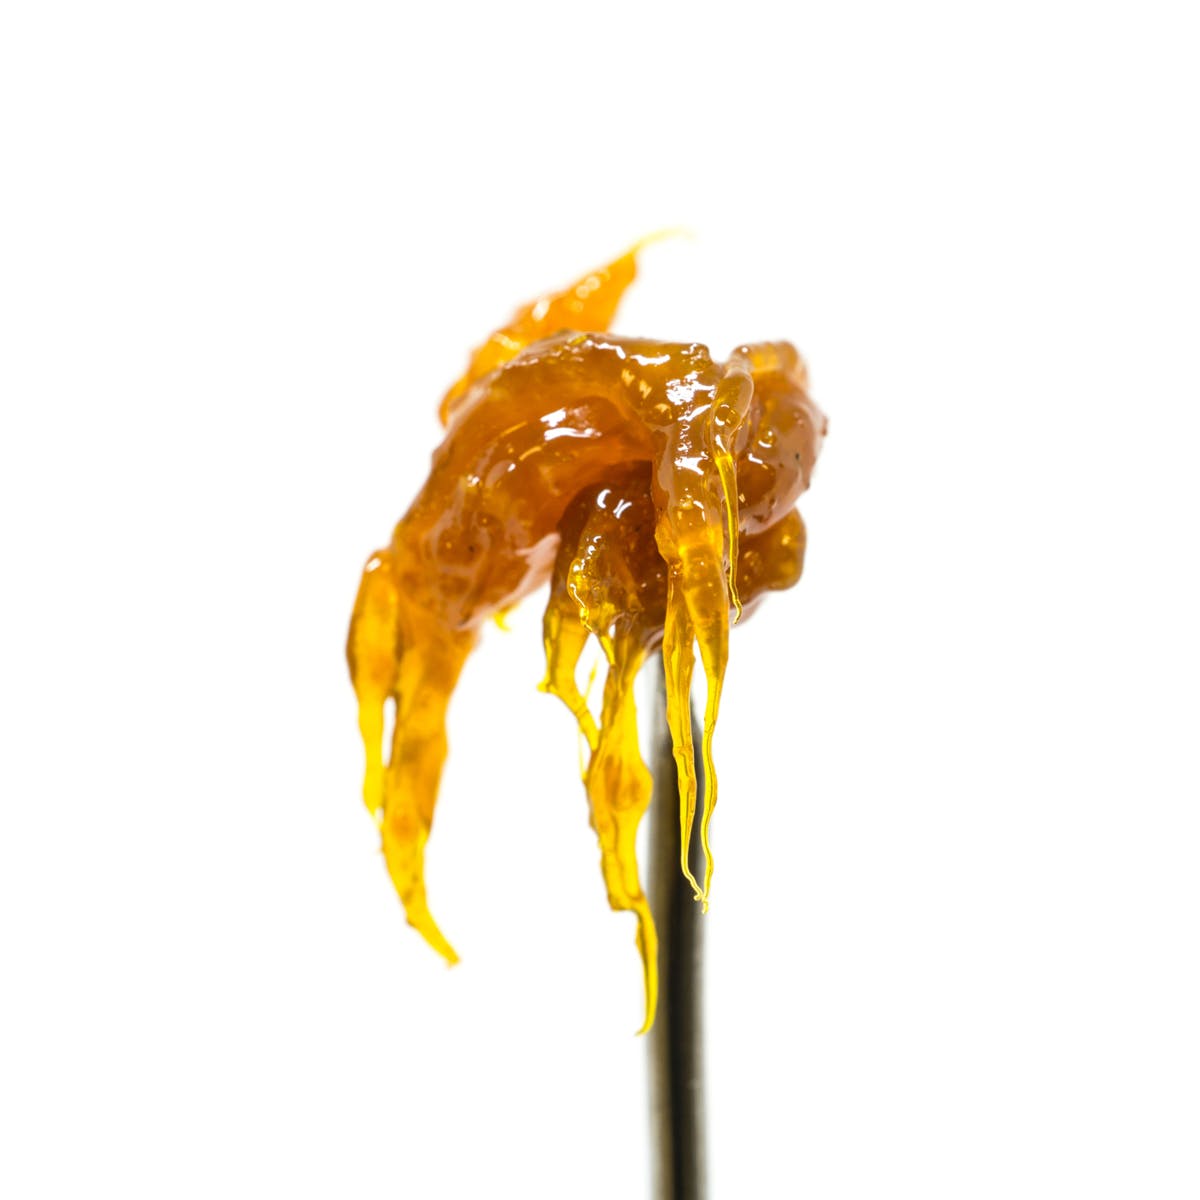 concentrate-odo-co2-extracts-odo-co2-sugar-wax